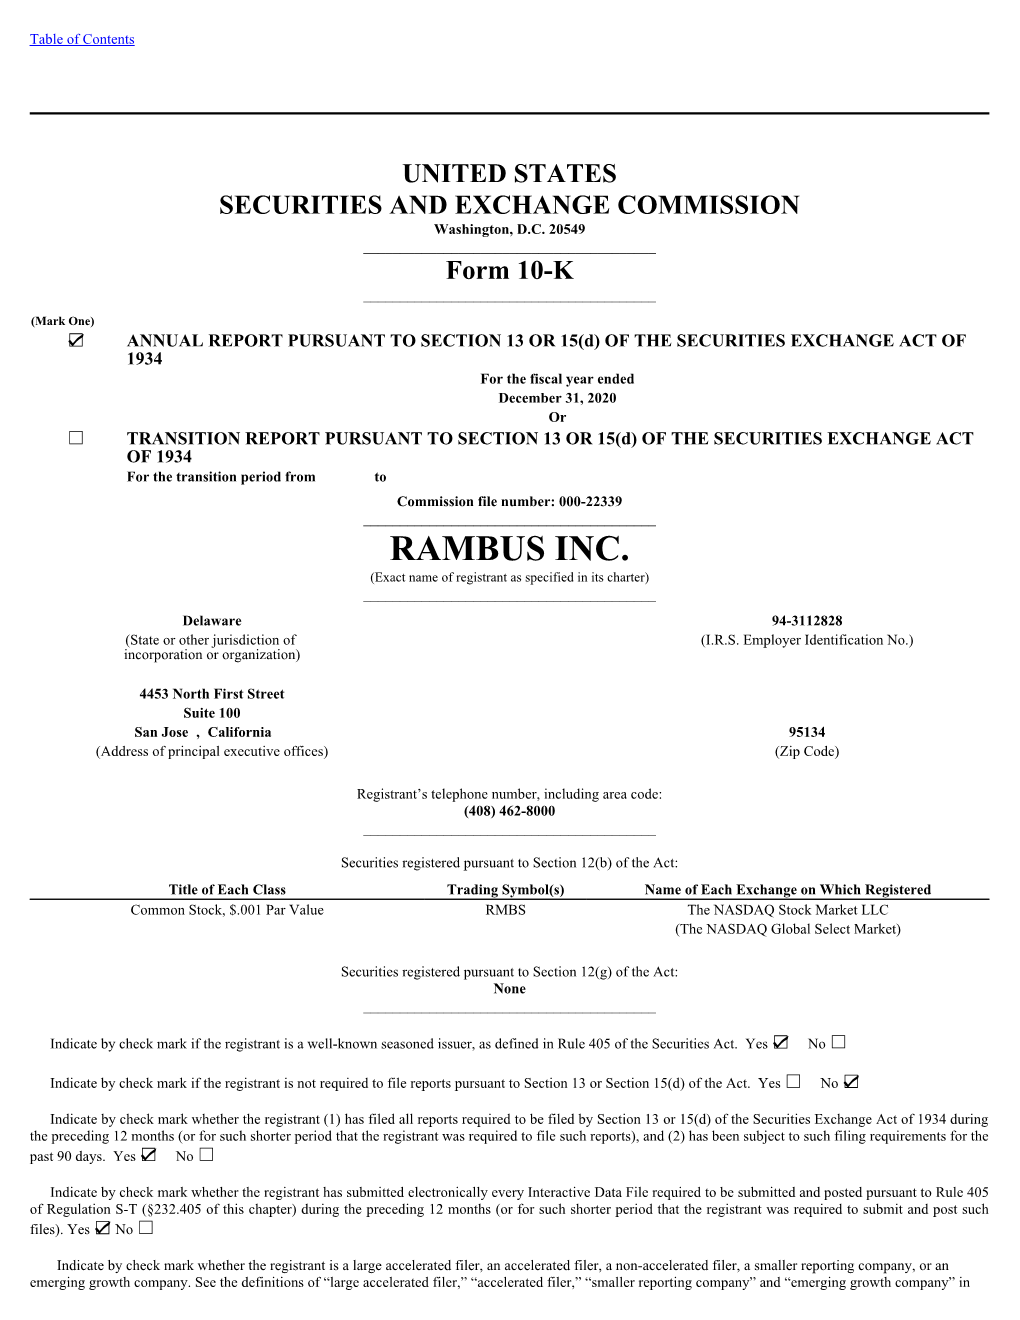 RAMBUS INC. (Exact Name of Registrant As Specified in Its Charter) ______Delaware 94-3112828 (State Or Other Jurisdiction of (I.R.S